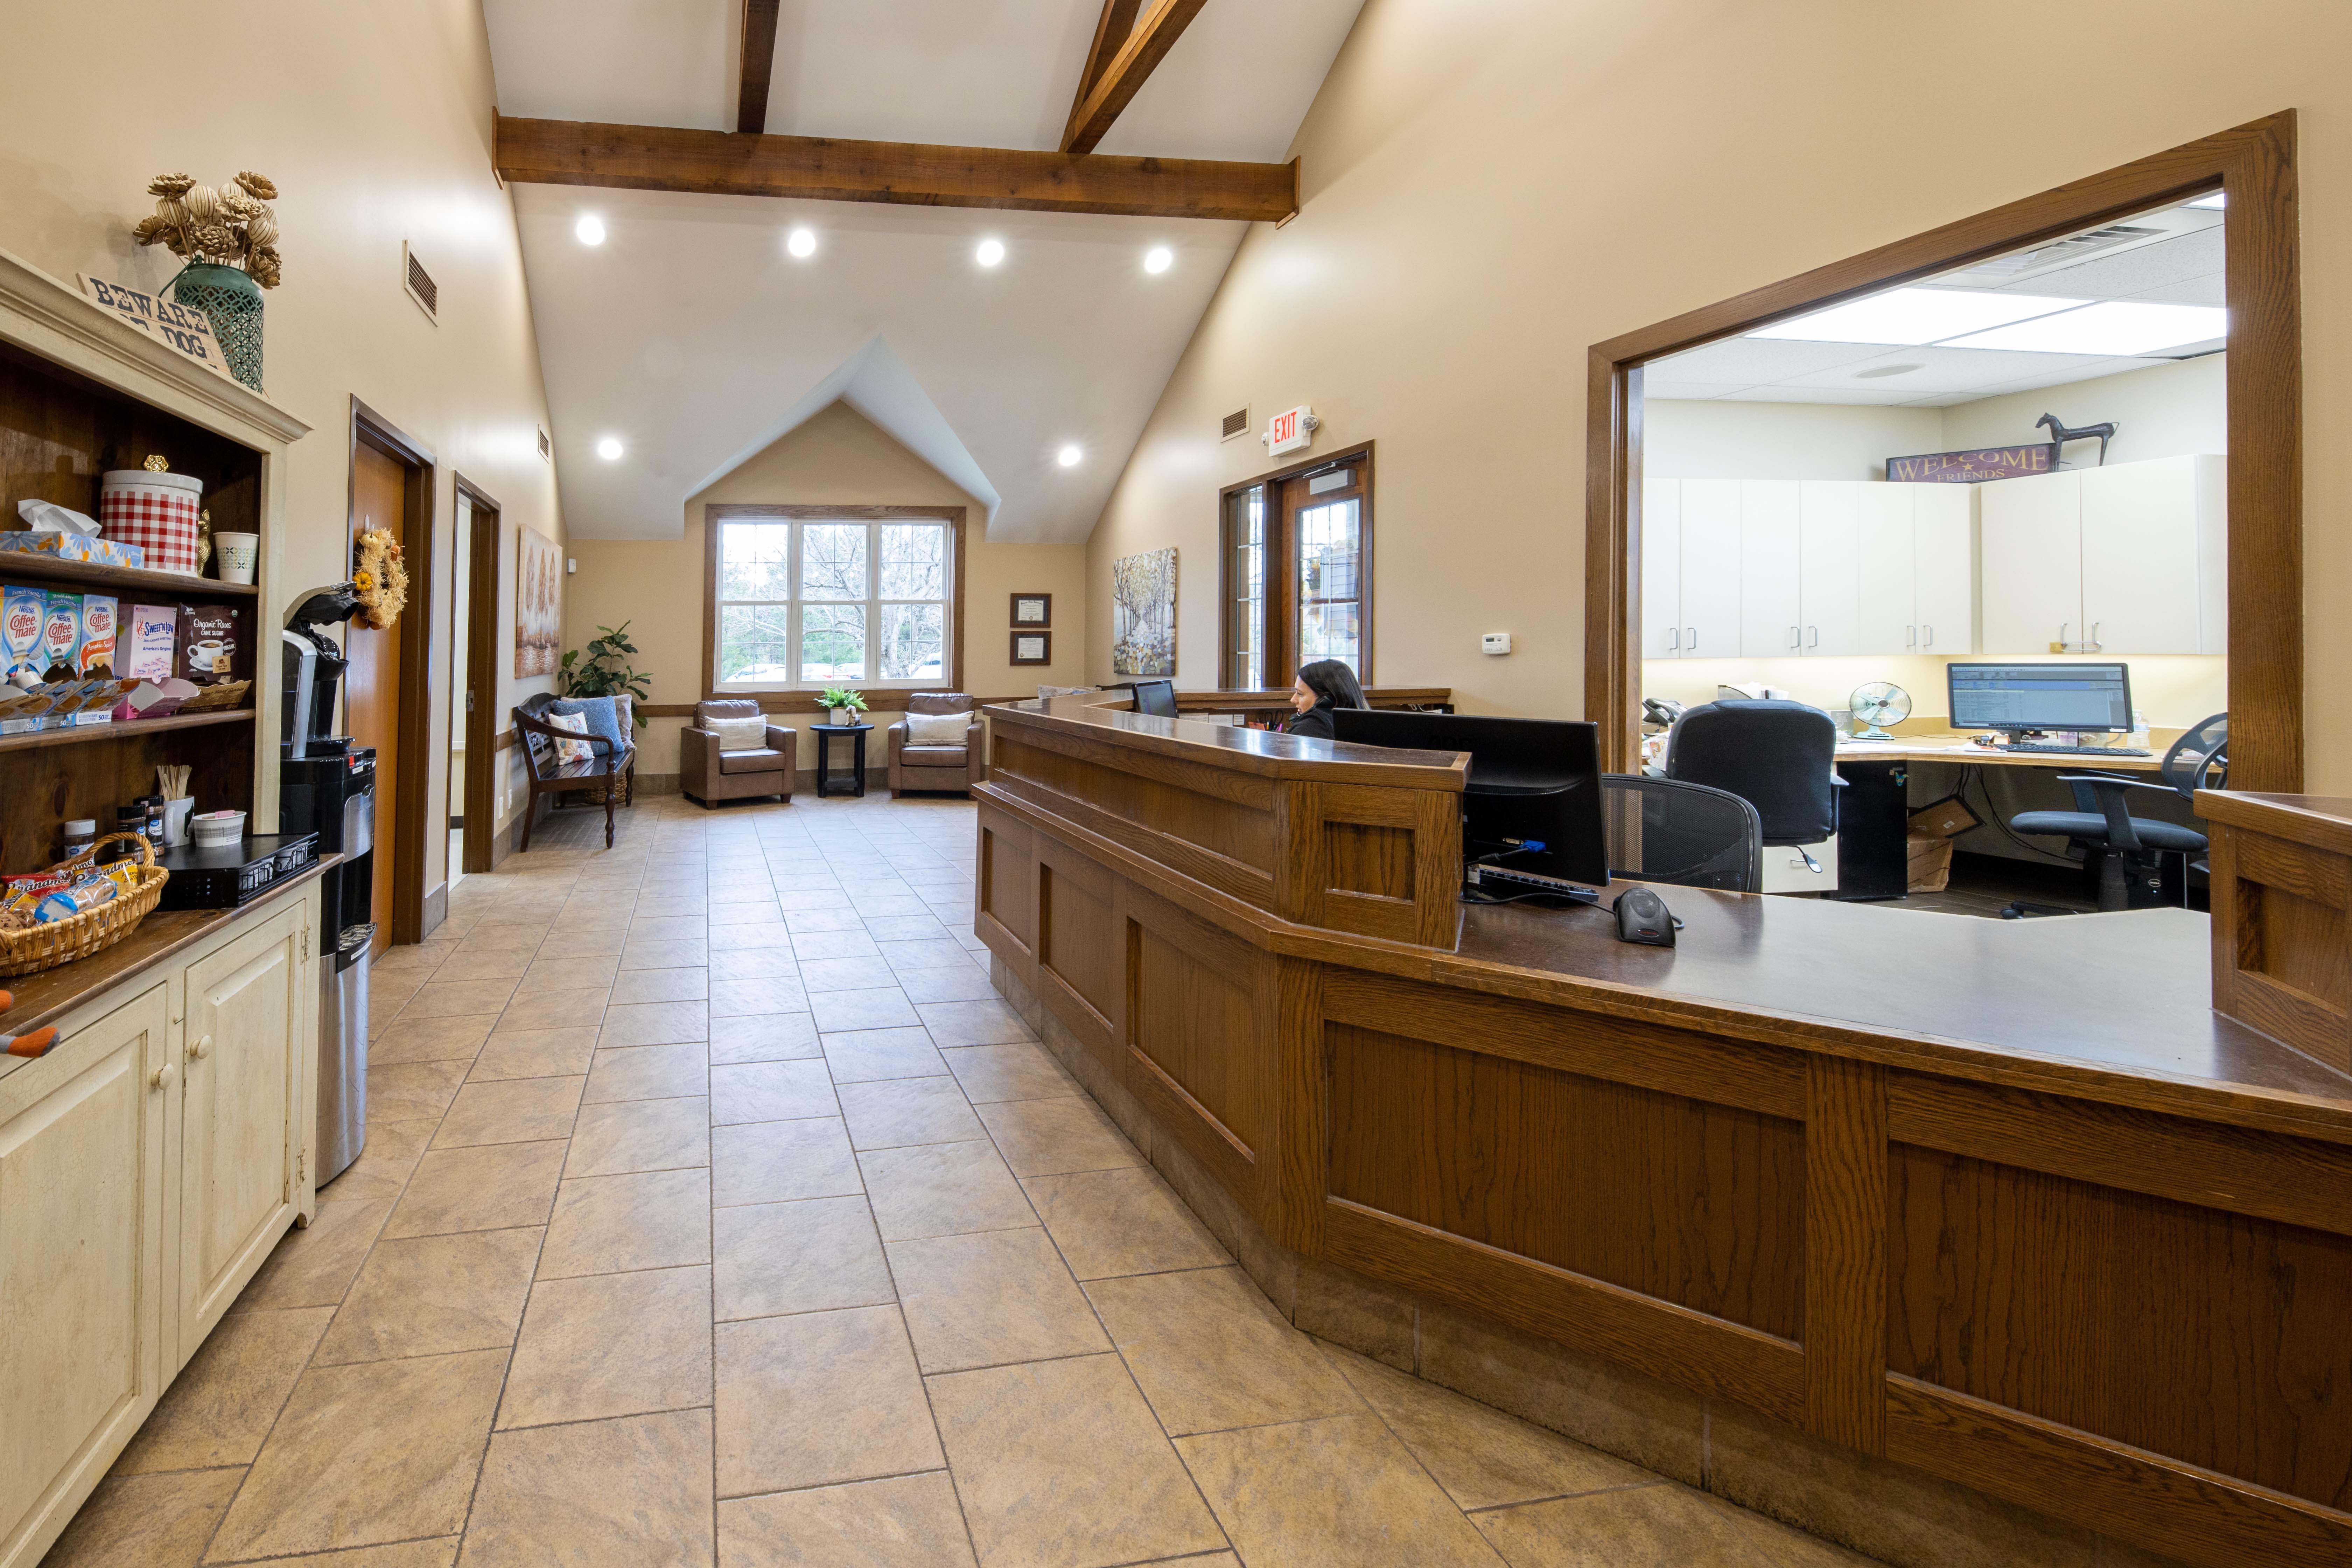 Our receptionists are friendly, helpful, and committed to providing you with a superior client experience.